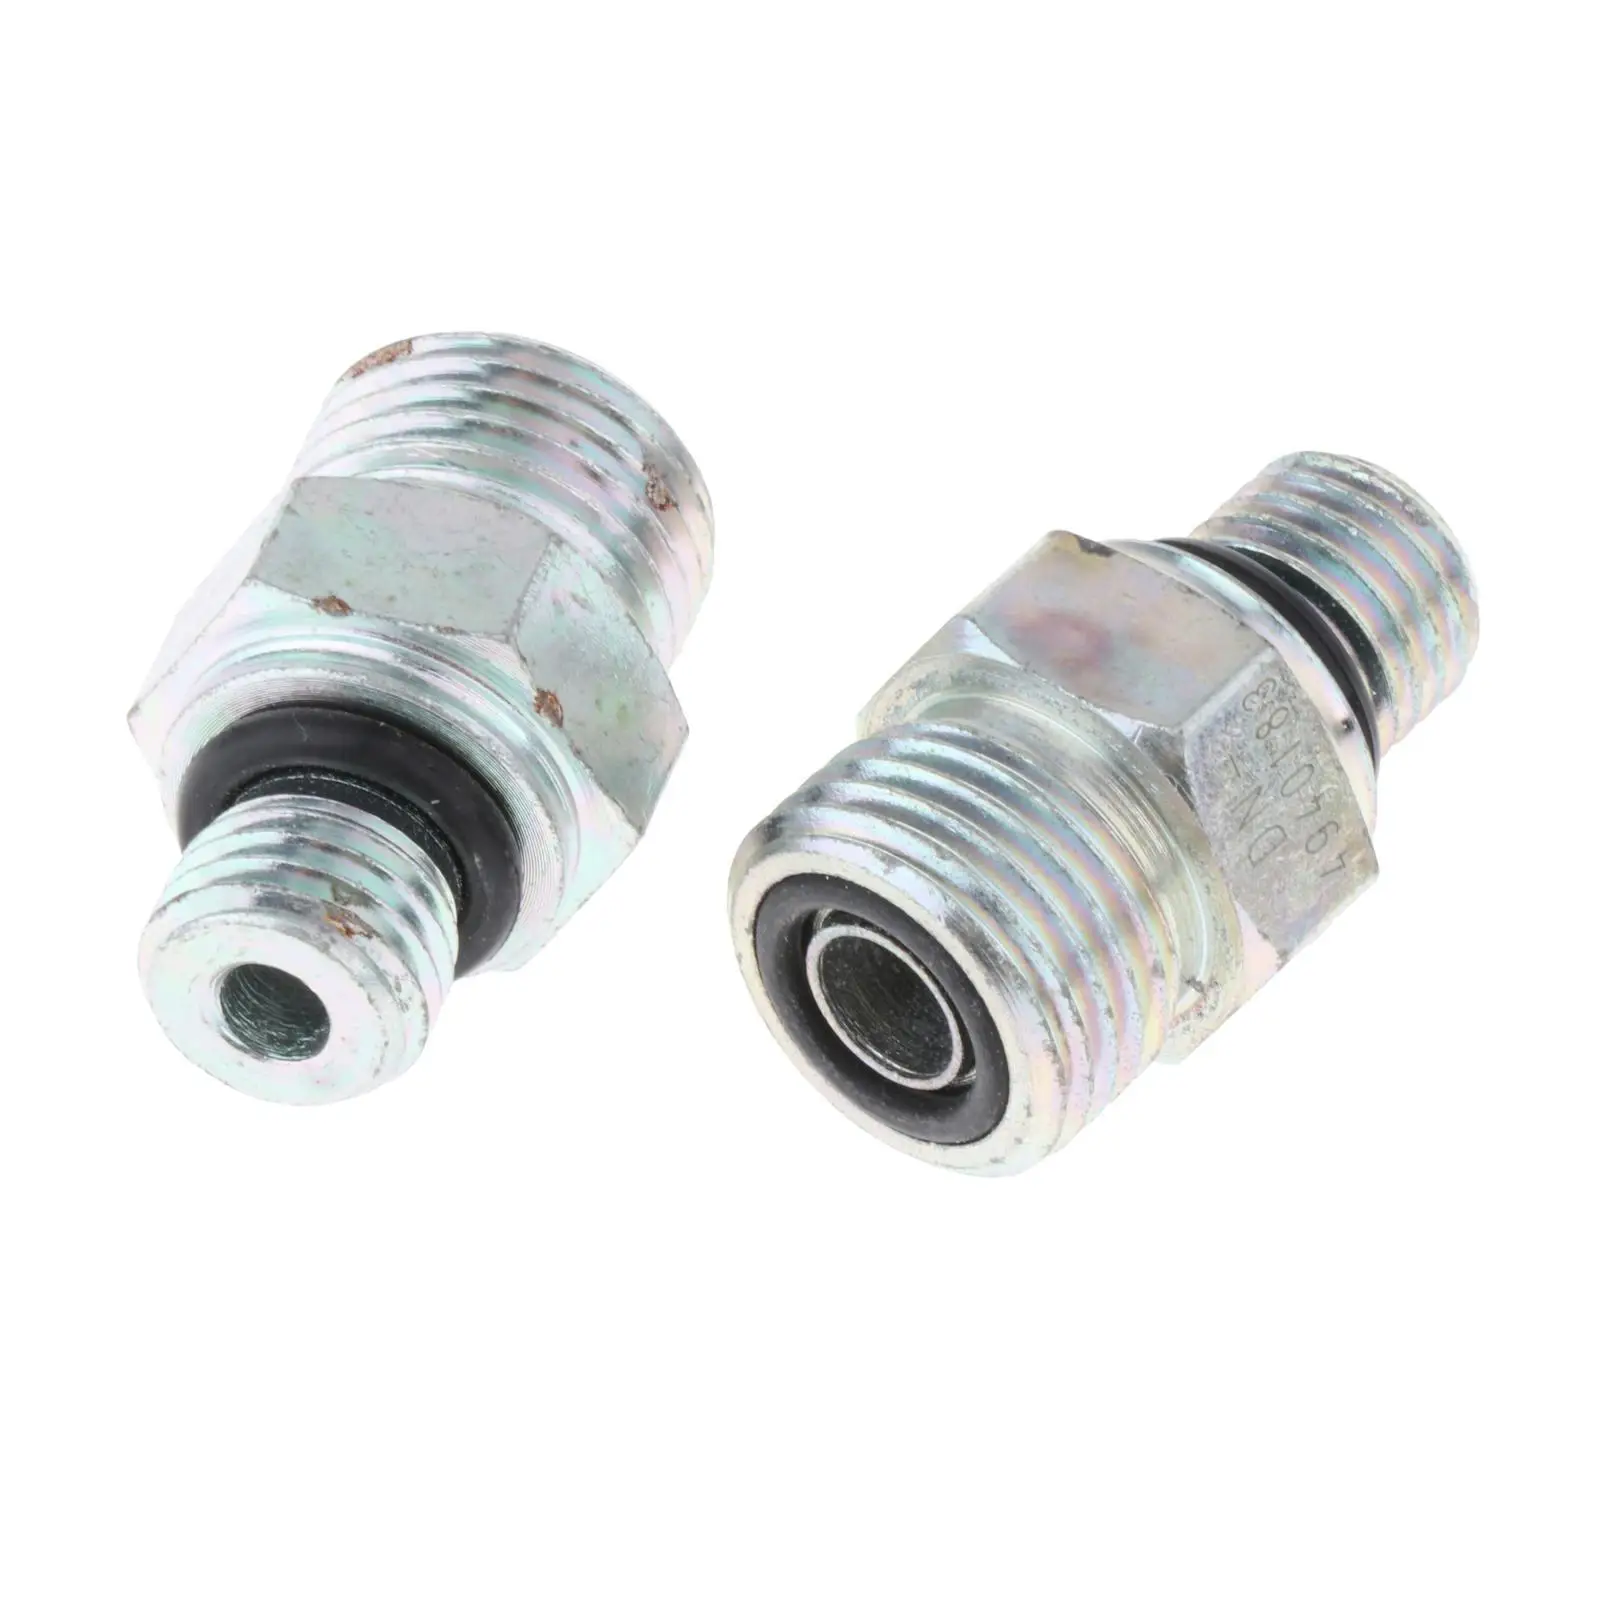 2Pcs Turbo Oil feed Line Fitting for Vehicle Automotive Engine Parts